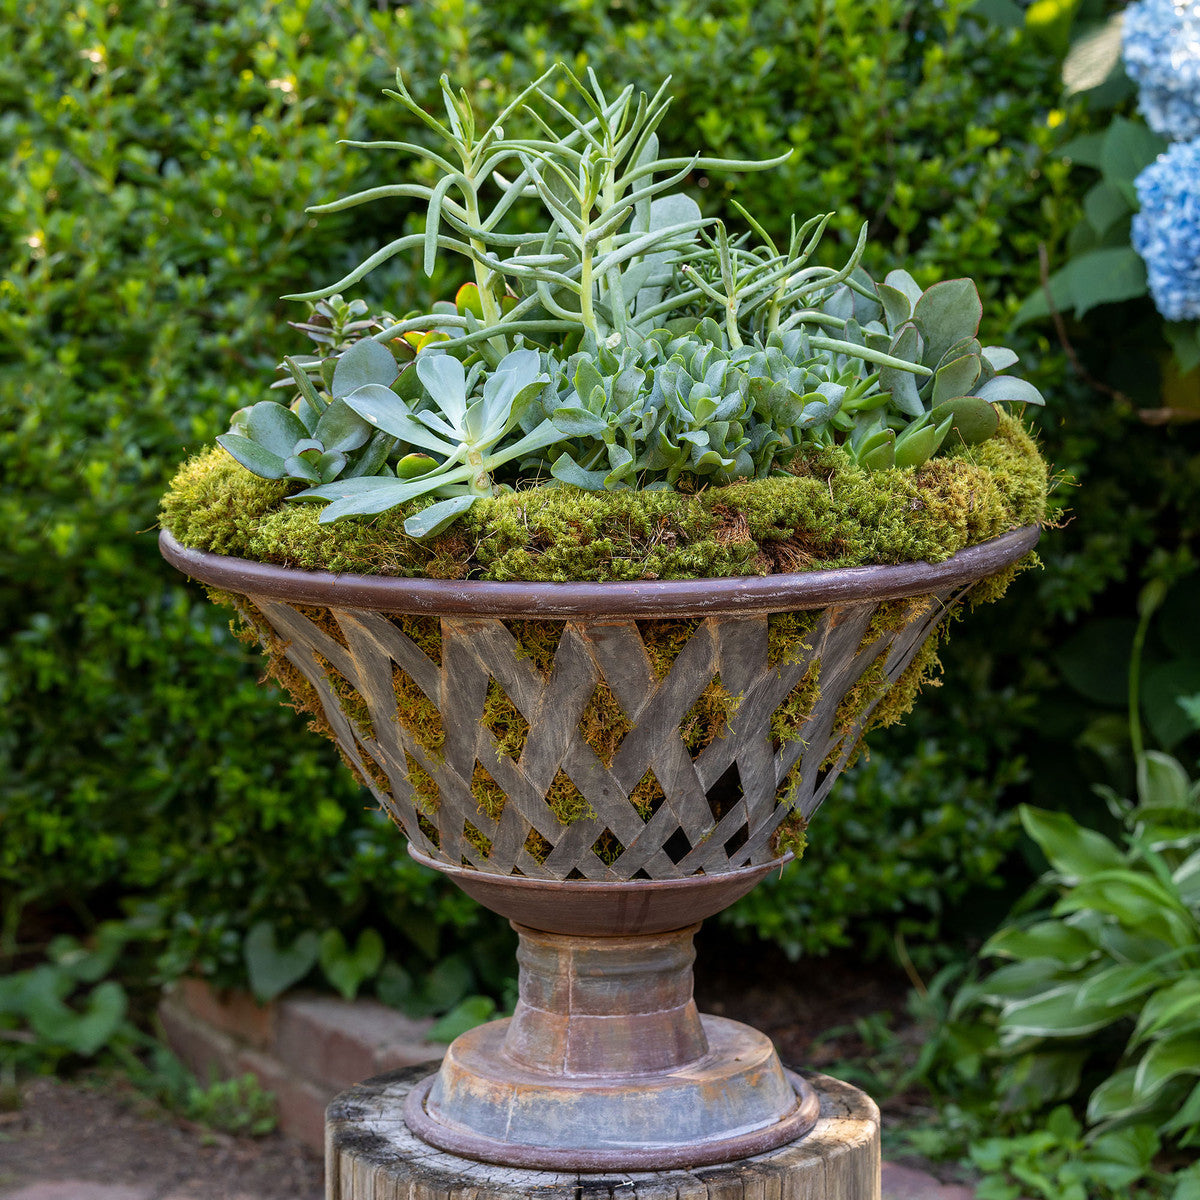 woven metal luxe footed bowl planter in garden filled with green succulents blue hydrangea